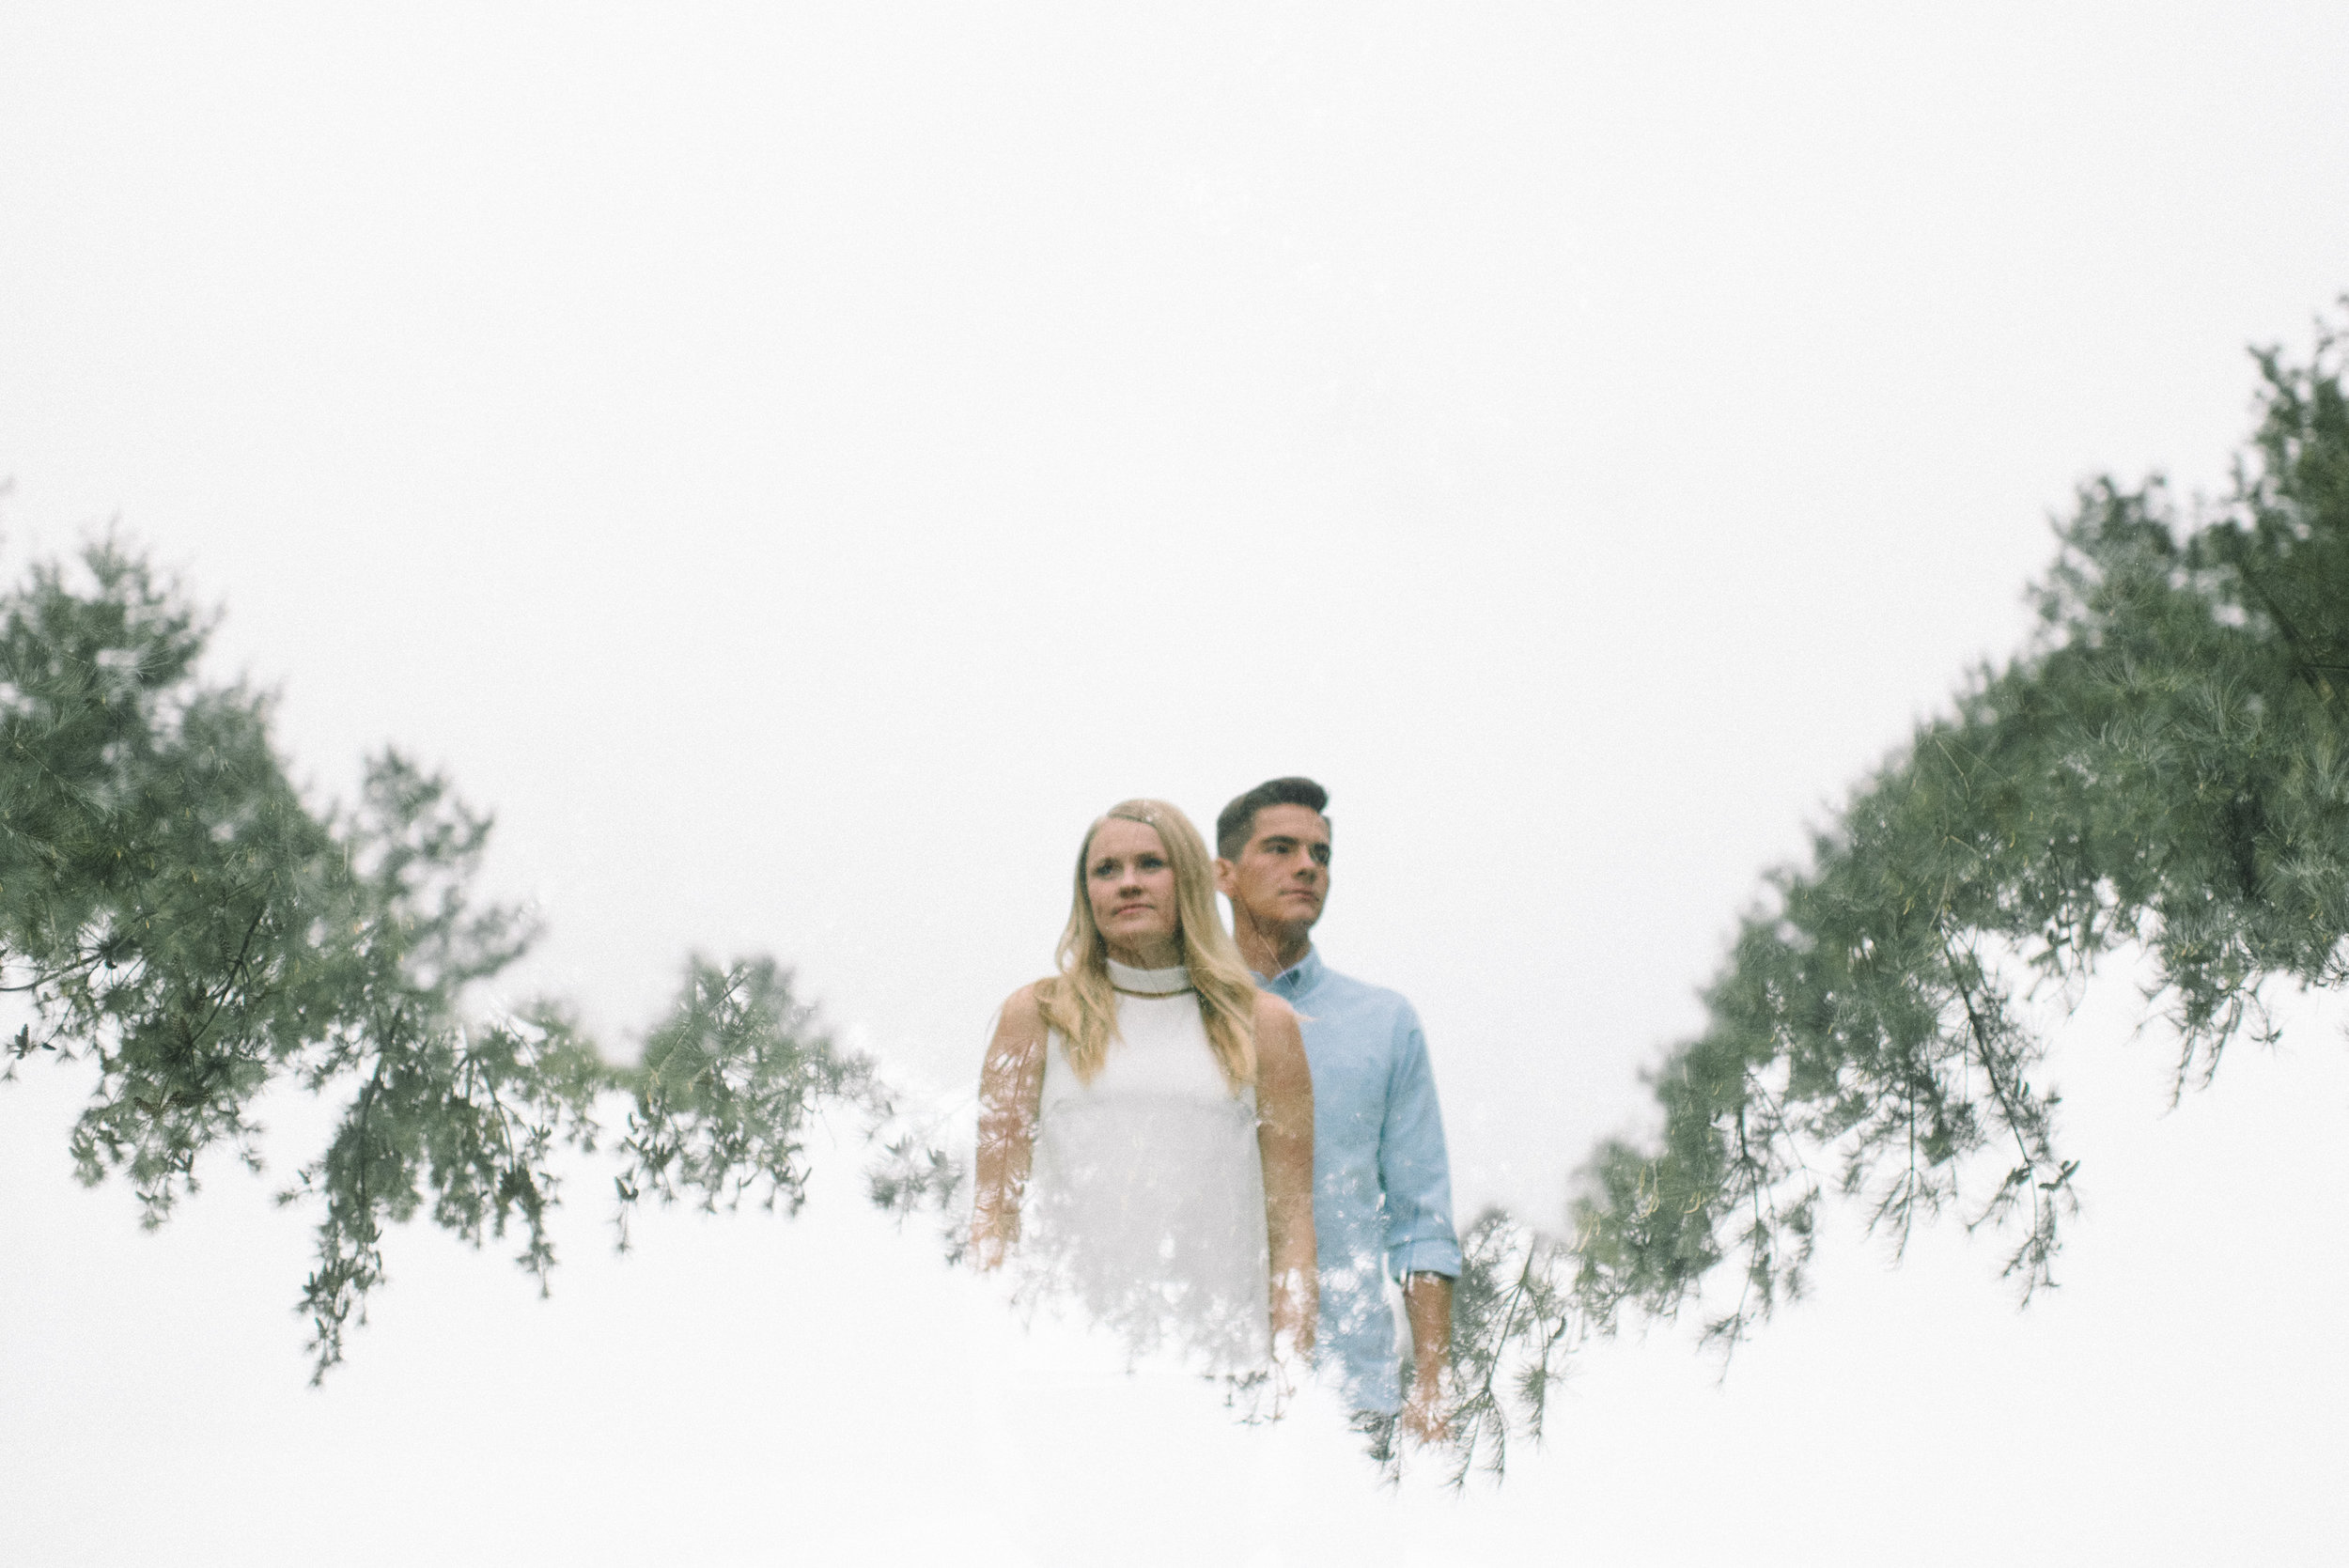 Andrew McClanahan Alex Hilliard Rusty Wright Wooded Woodsy Kansas City Engagement Portraits